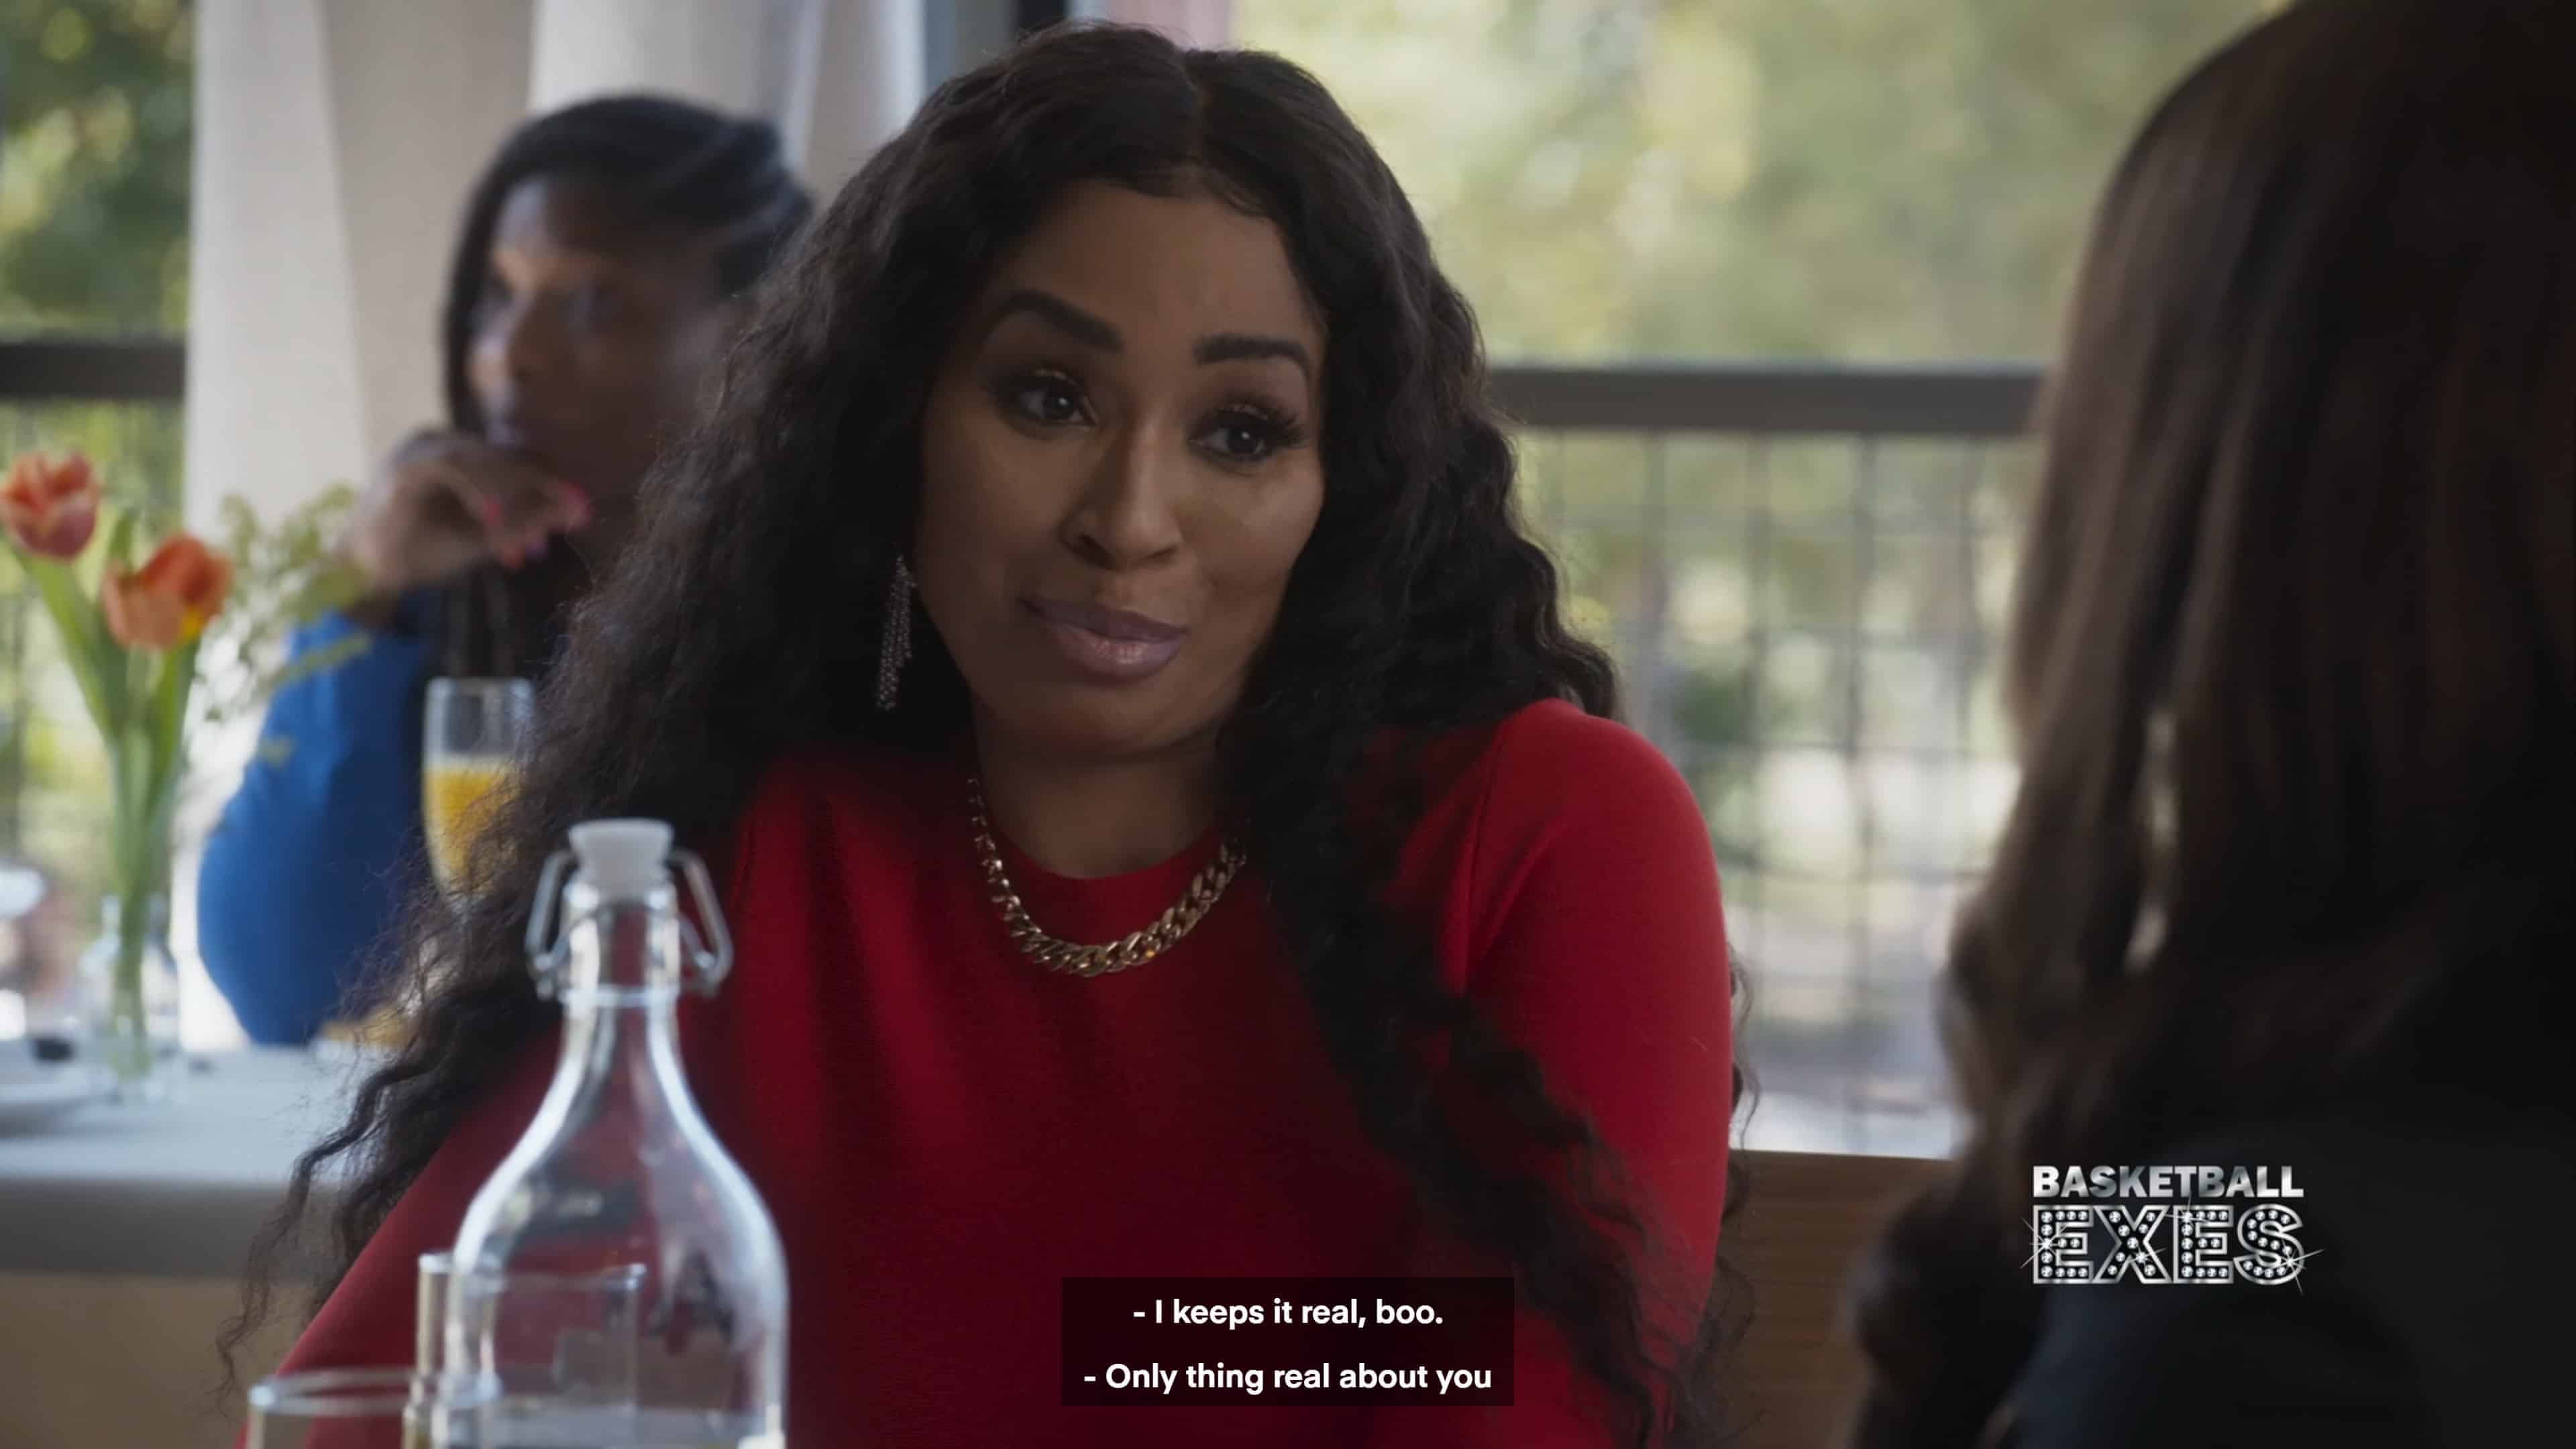 One of Tracey's co-stars on Basketball Exes, Renee (Karlie Redd)